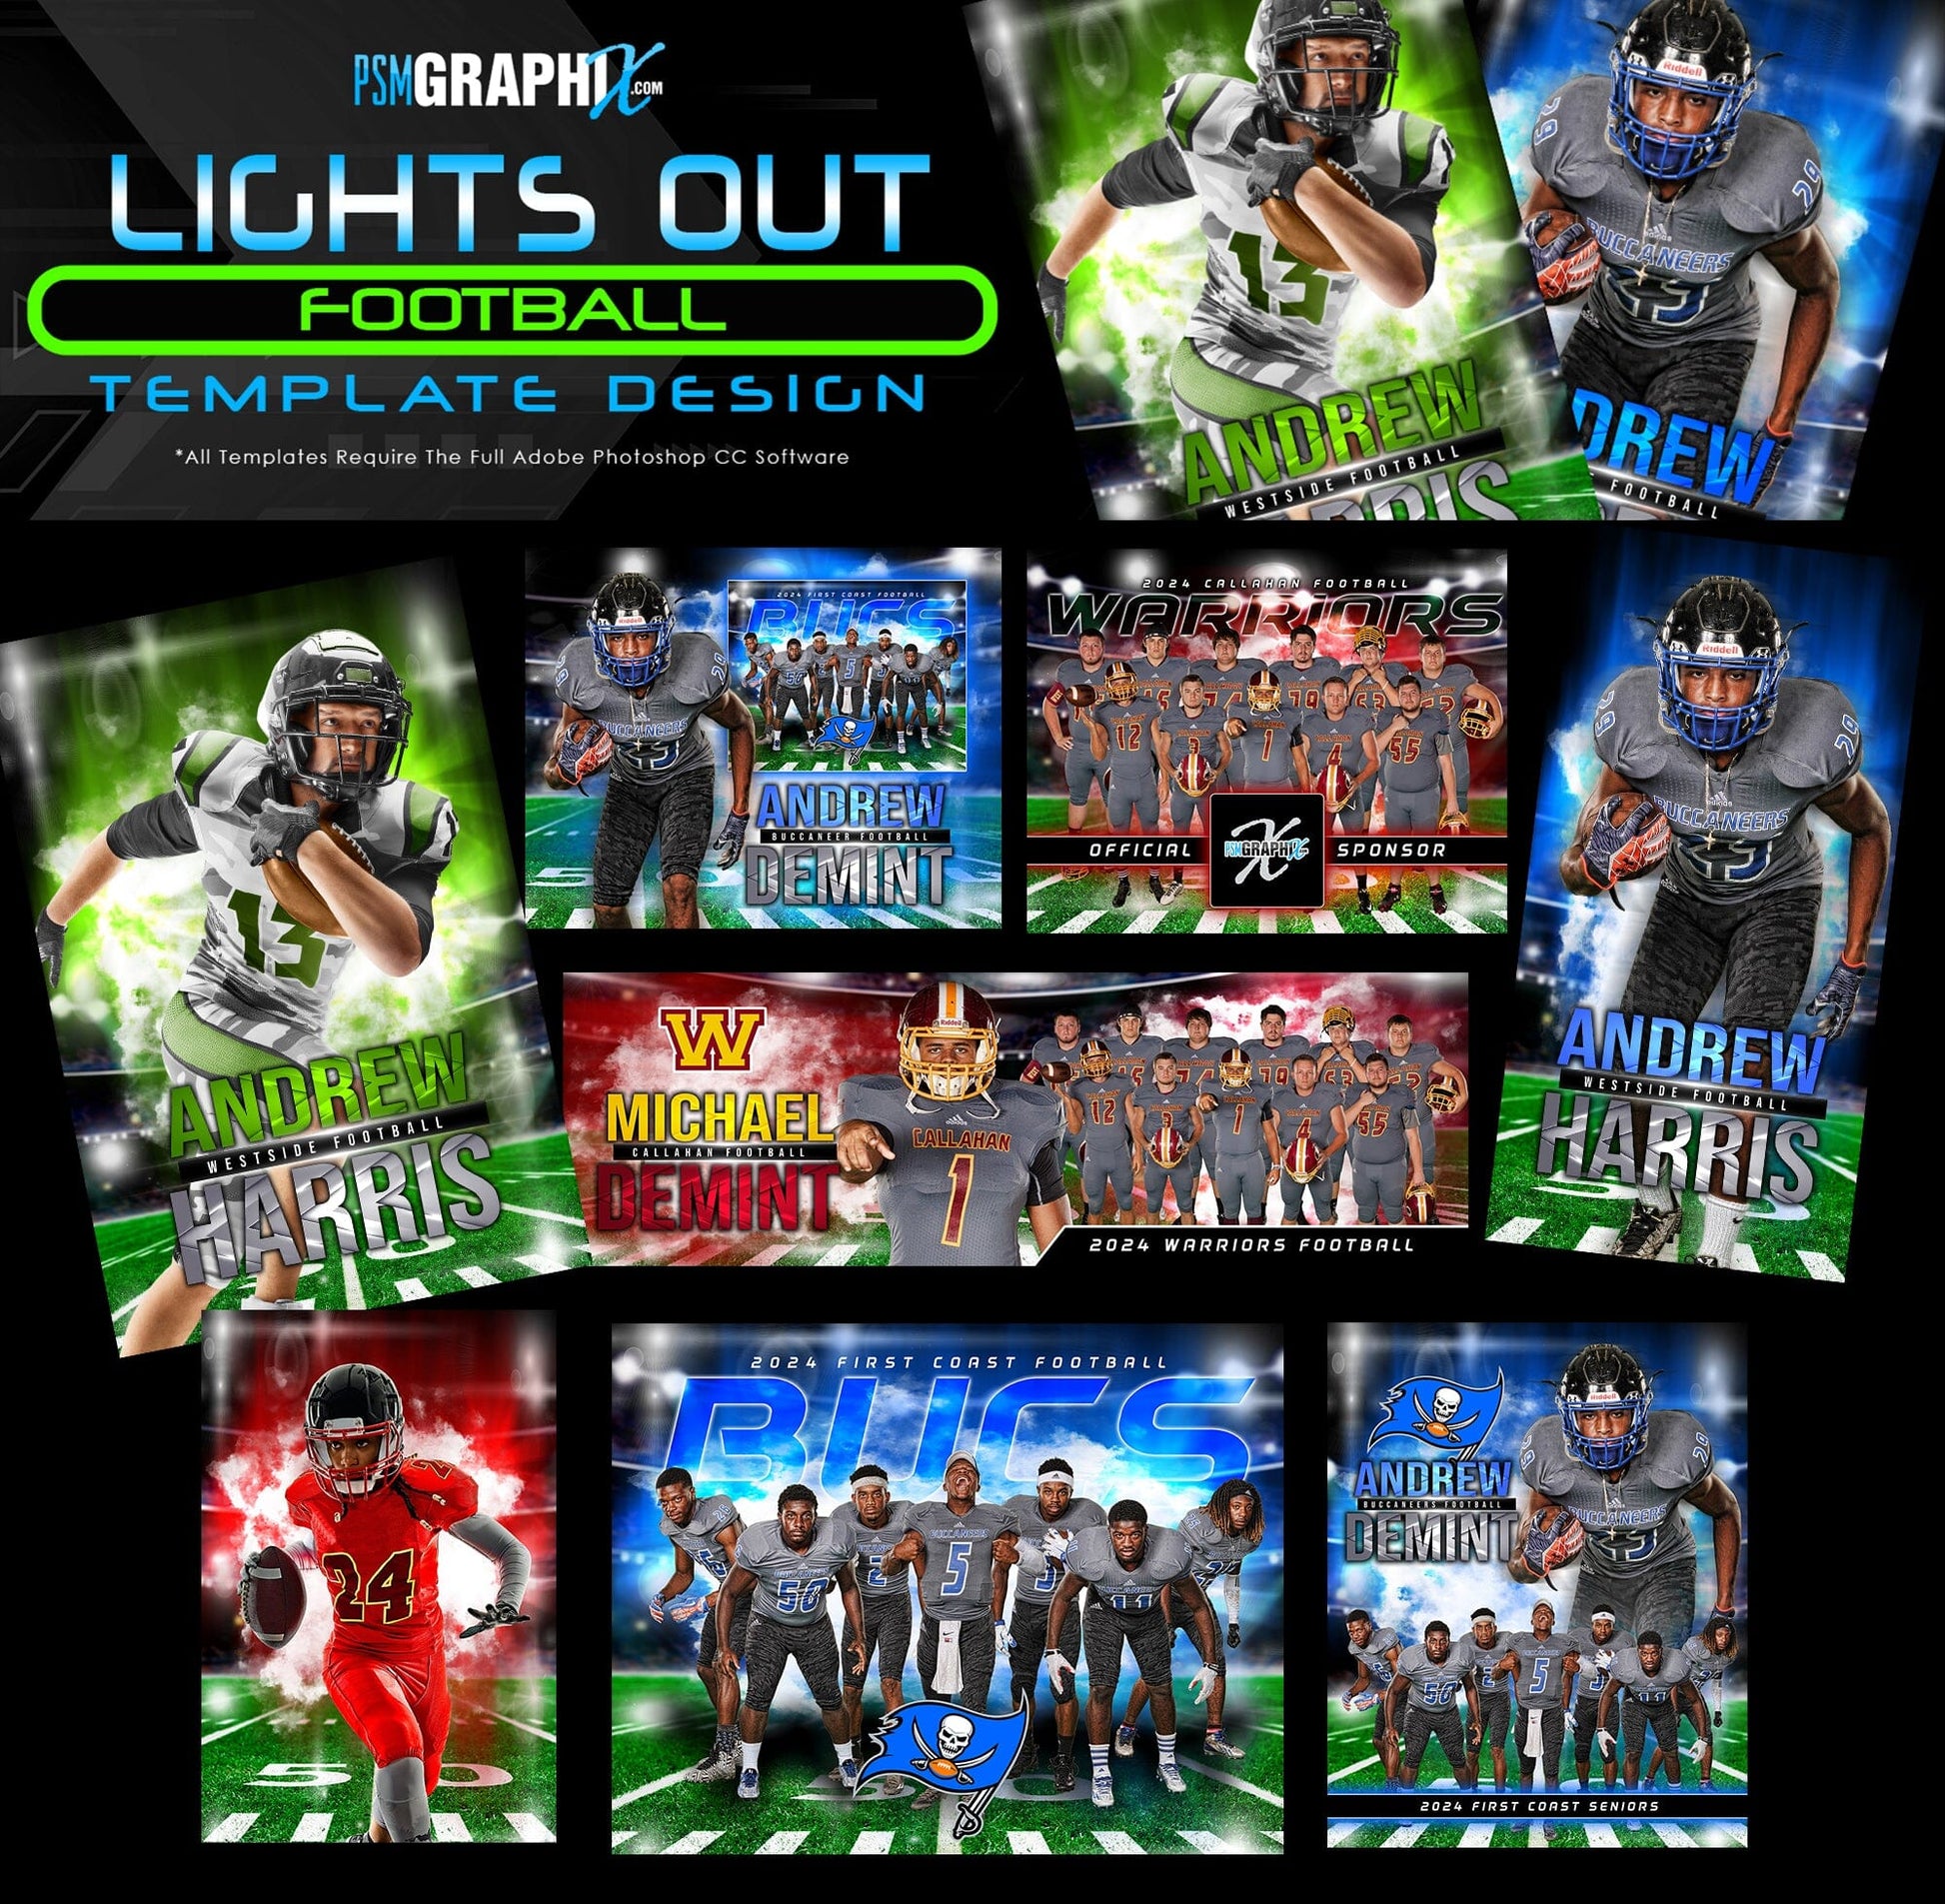 Lights Out - Football Specific - FULL TEMPLATE COLLECTION-Photoshop Template - PSMGraphix